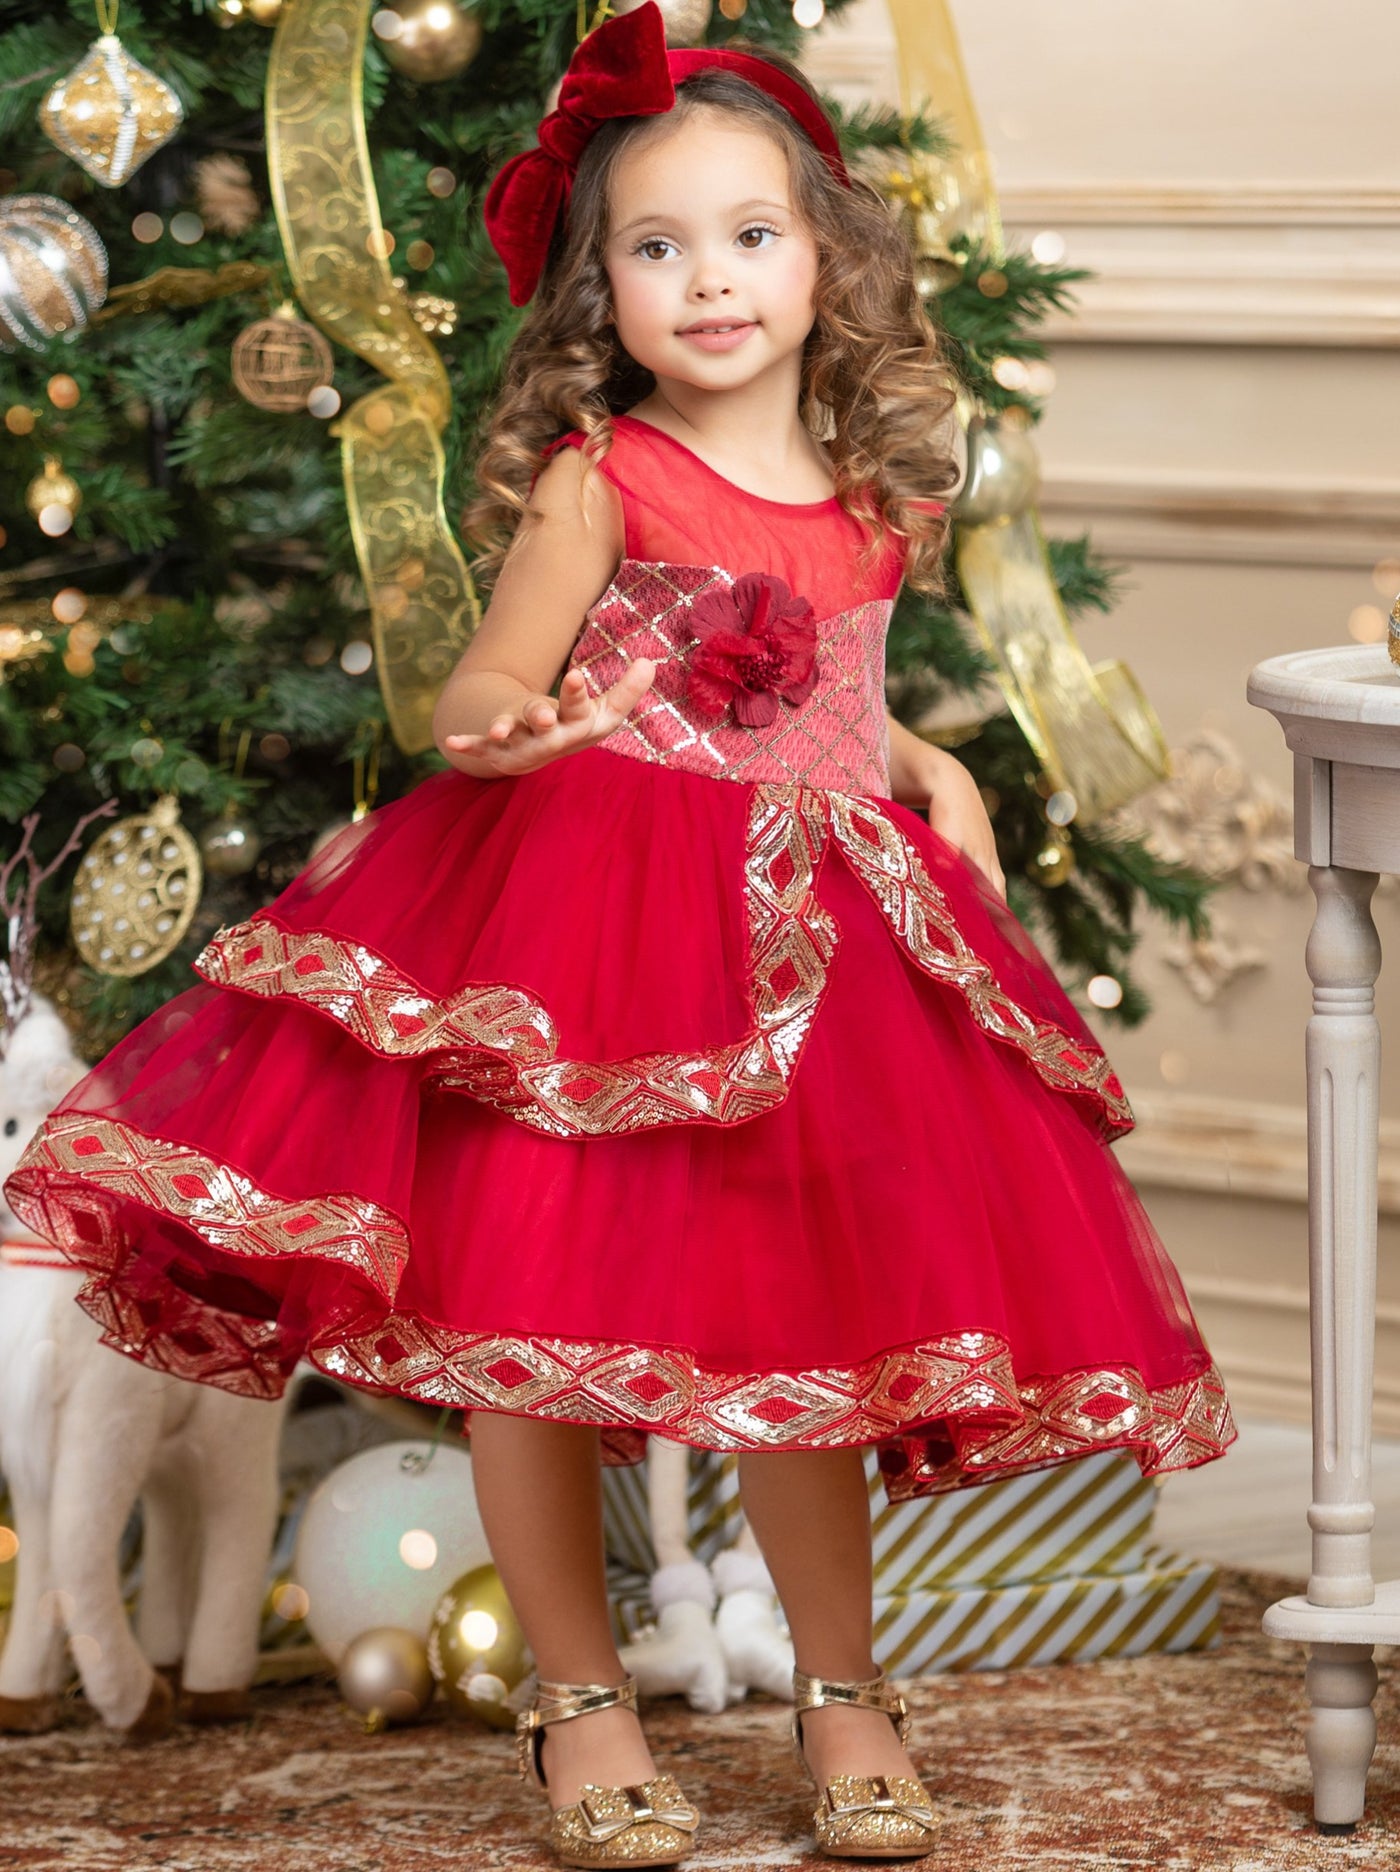 Girls Winter Formal Dress | Tiered Tulle Holiday Dress | Mia Belle Girls